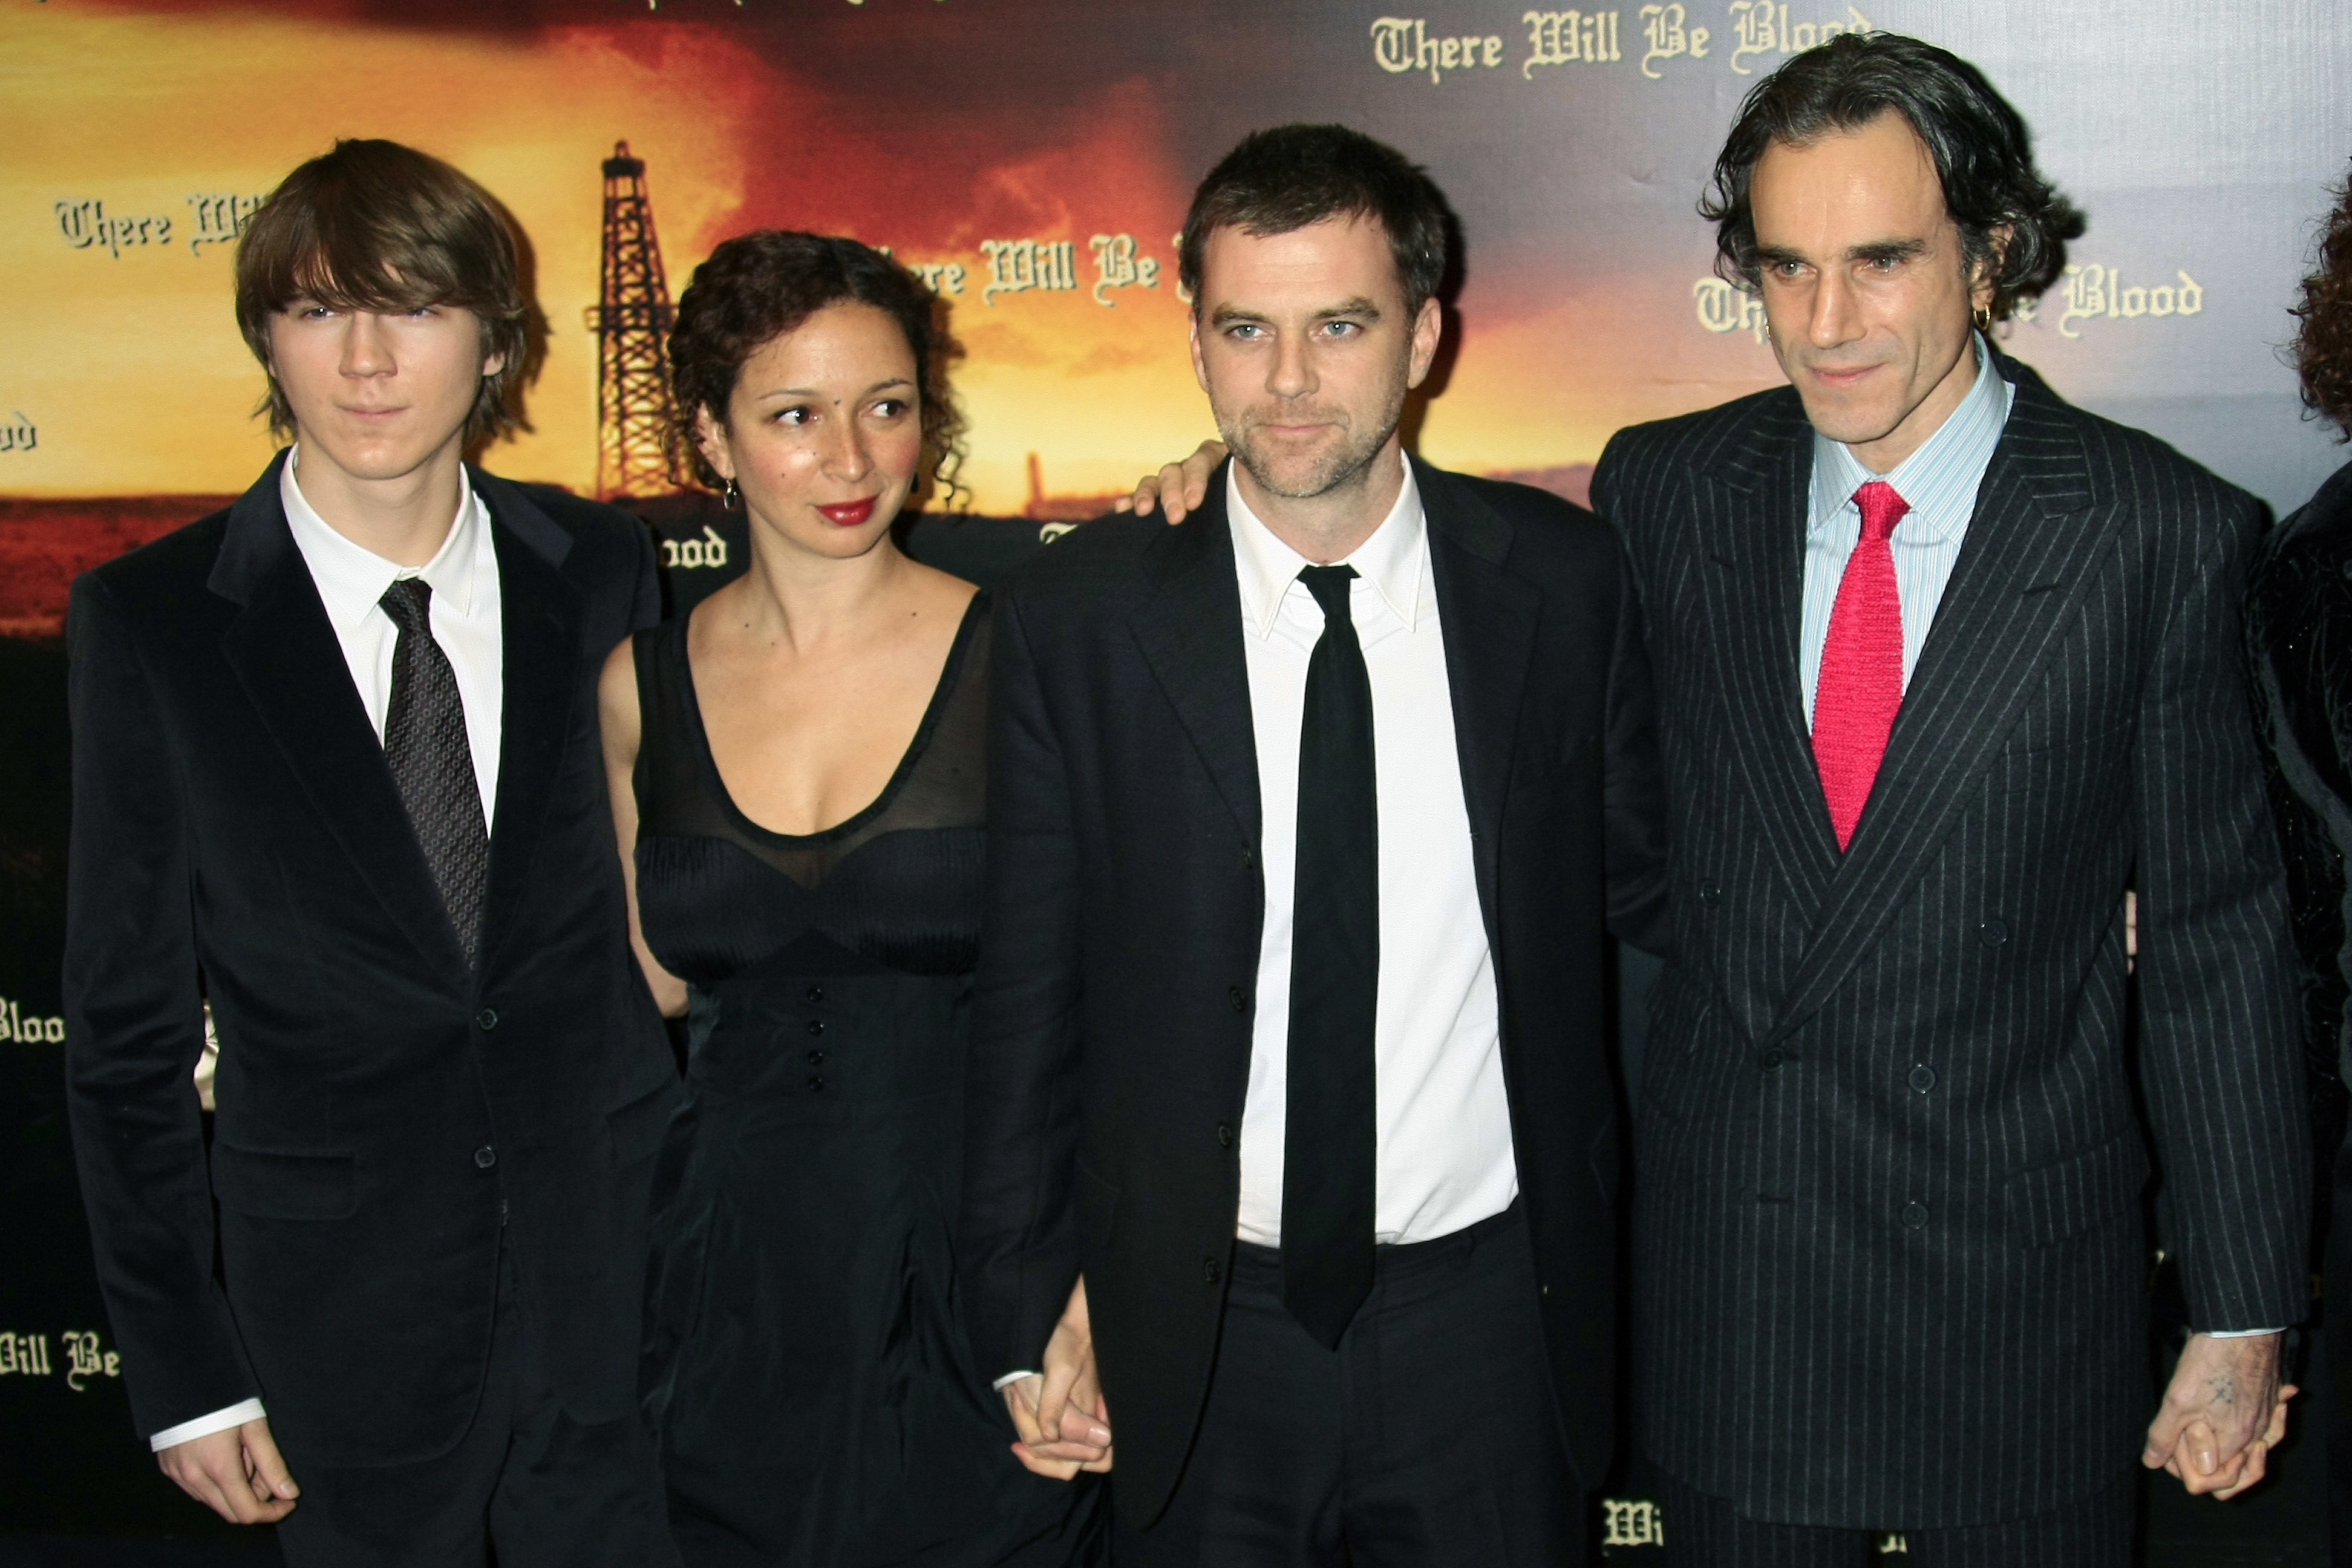 Director Paul Thomas Anderson and cast members Daniel Day Lewis and Paul Dano attend the premiere of "There will be blood" in Paris. (Photo by Eddy LEMAISTRE/Corbis via Getty Images)